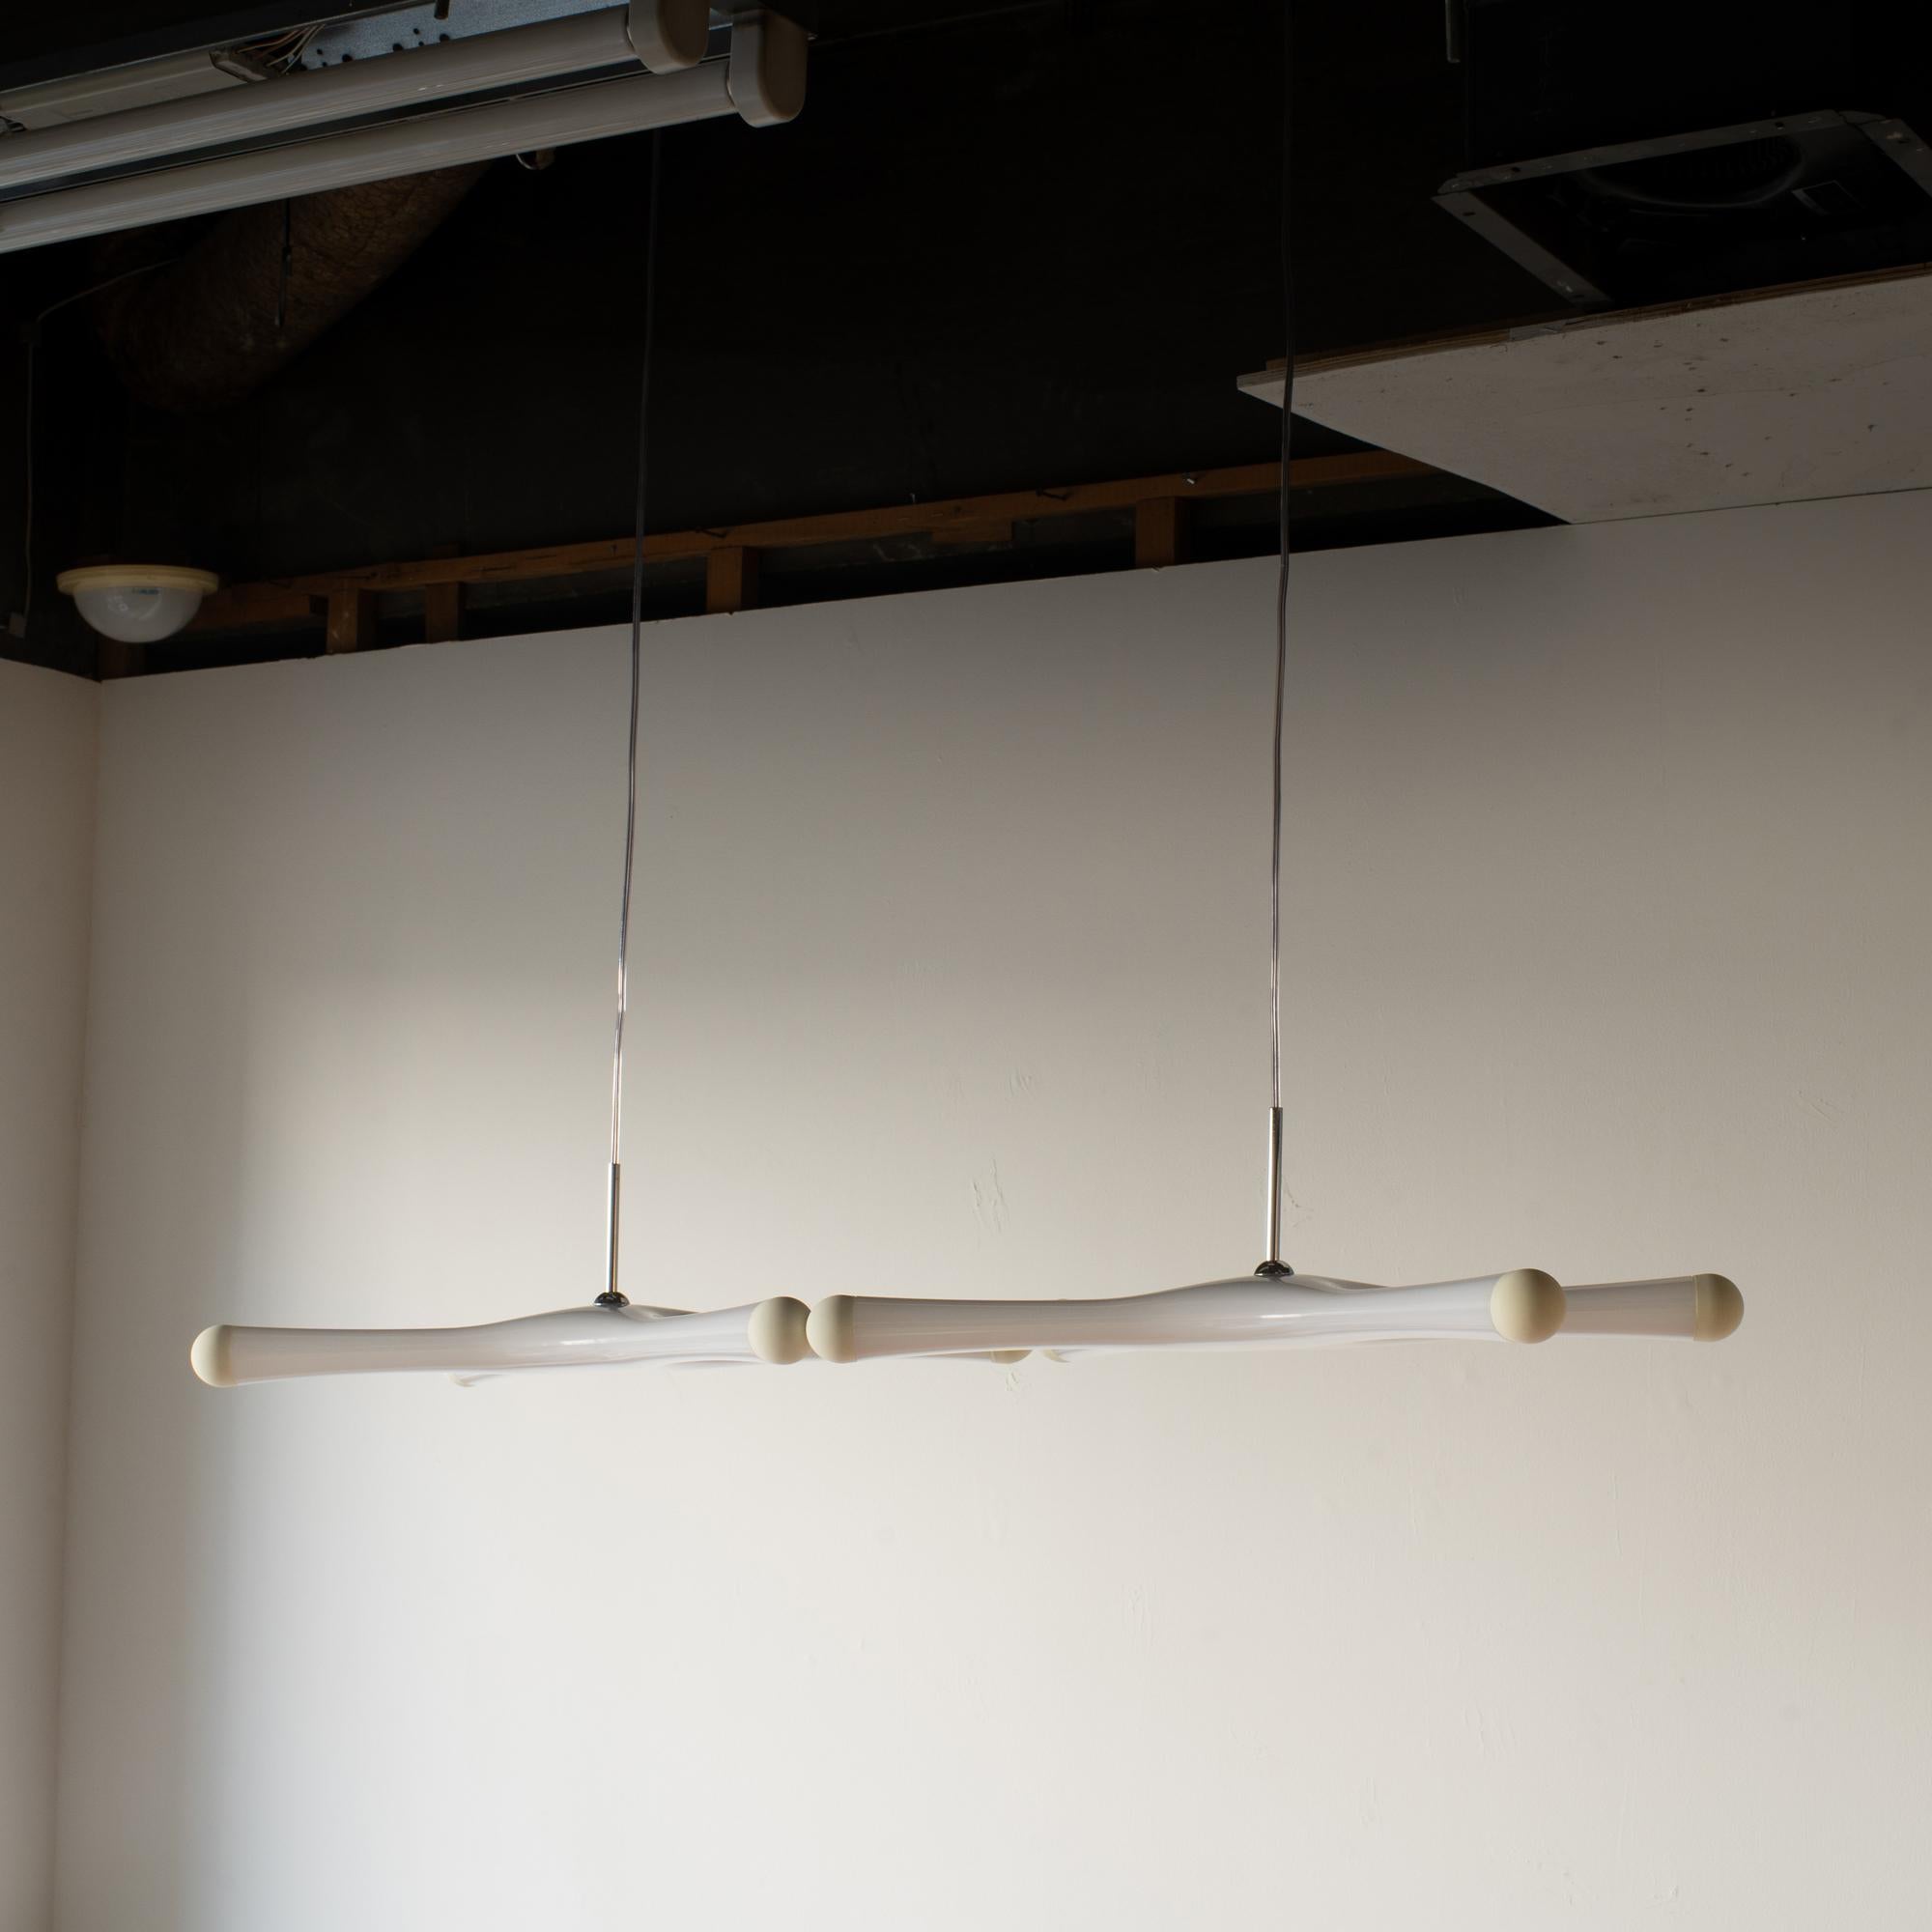 System X pendant lamp Ross Lovegrove Y2K style design space age In Excellent Condition For Sale In Shibuya-ku, Tokyo